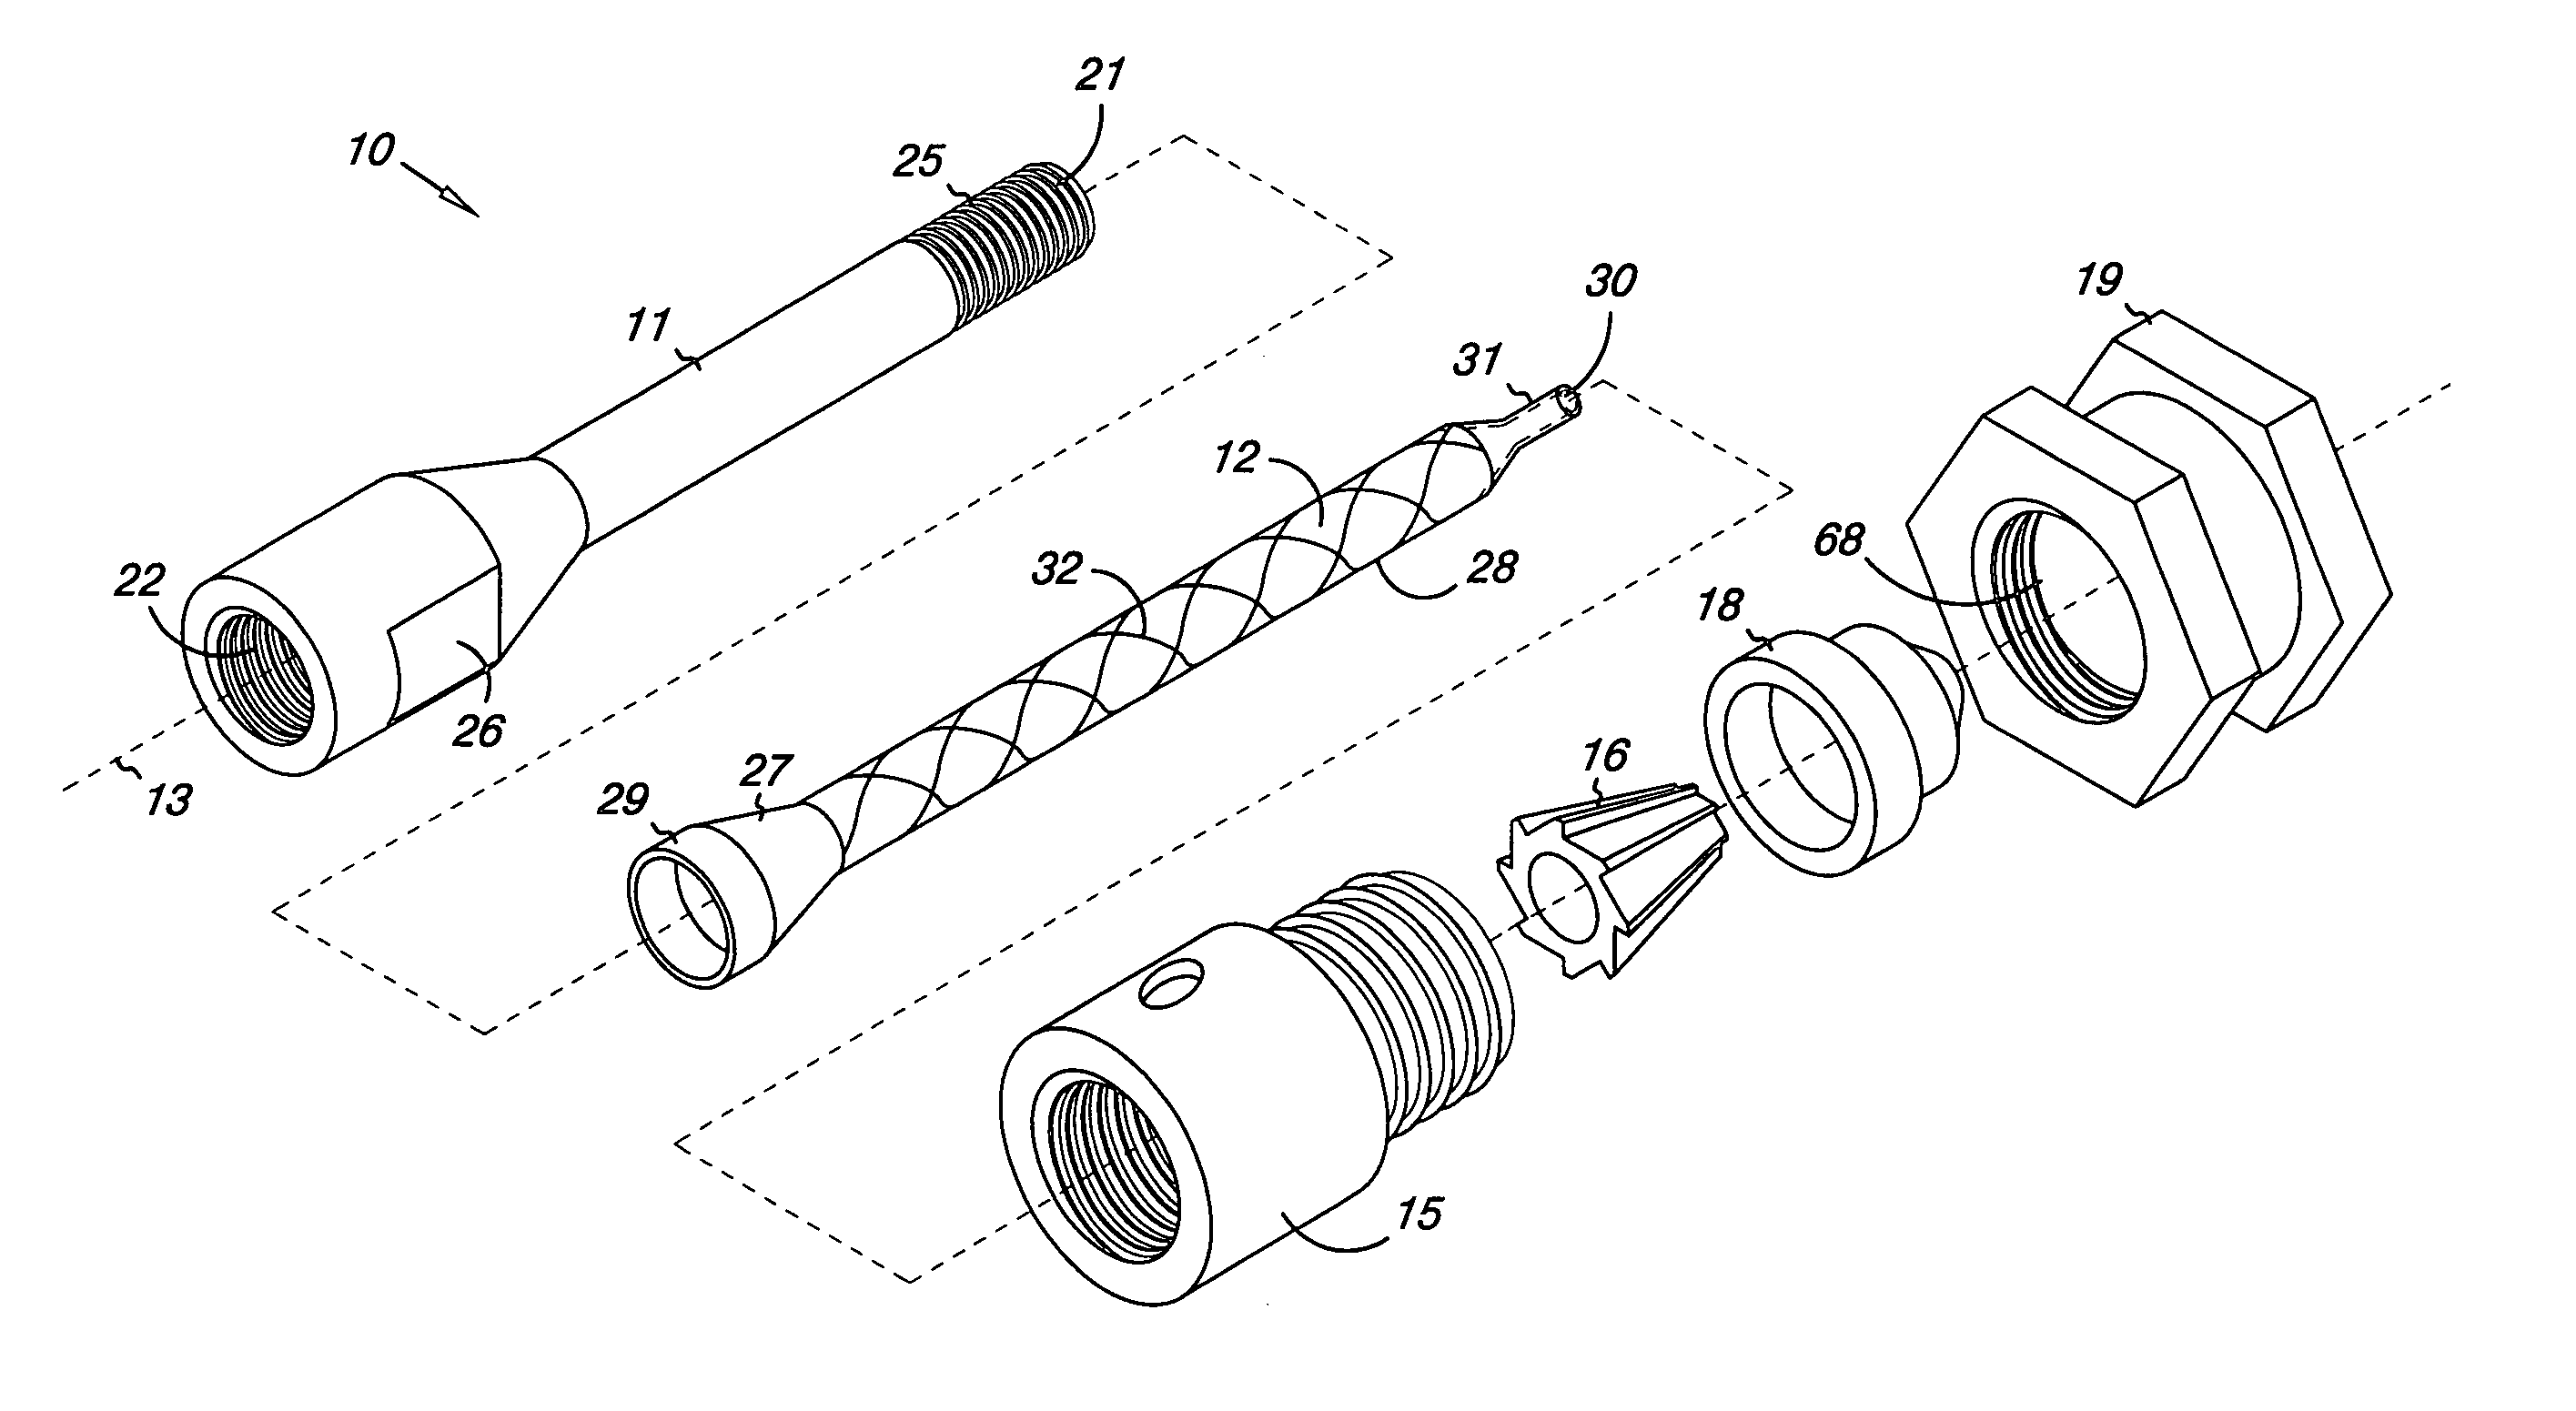 Spray head and air atomizing assembly